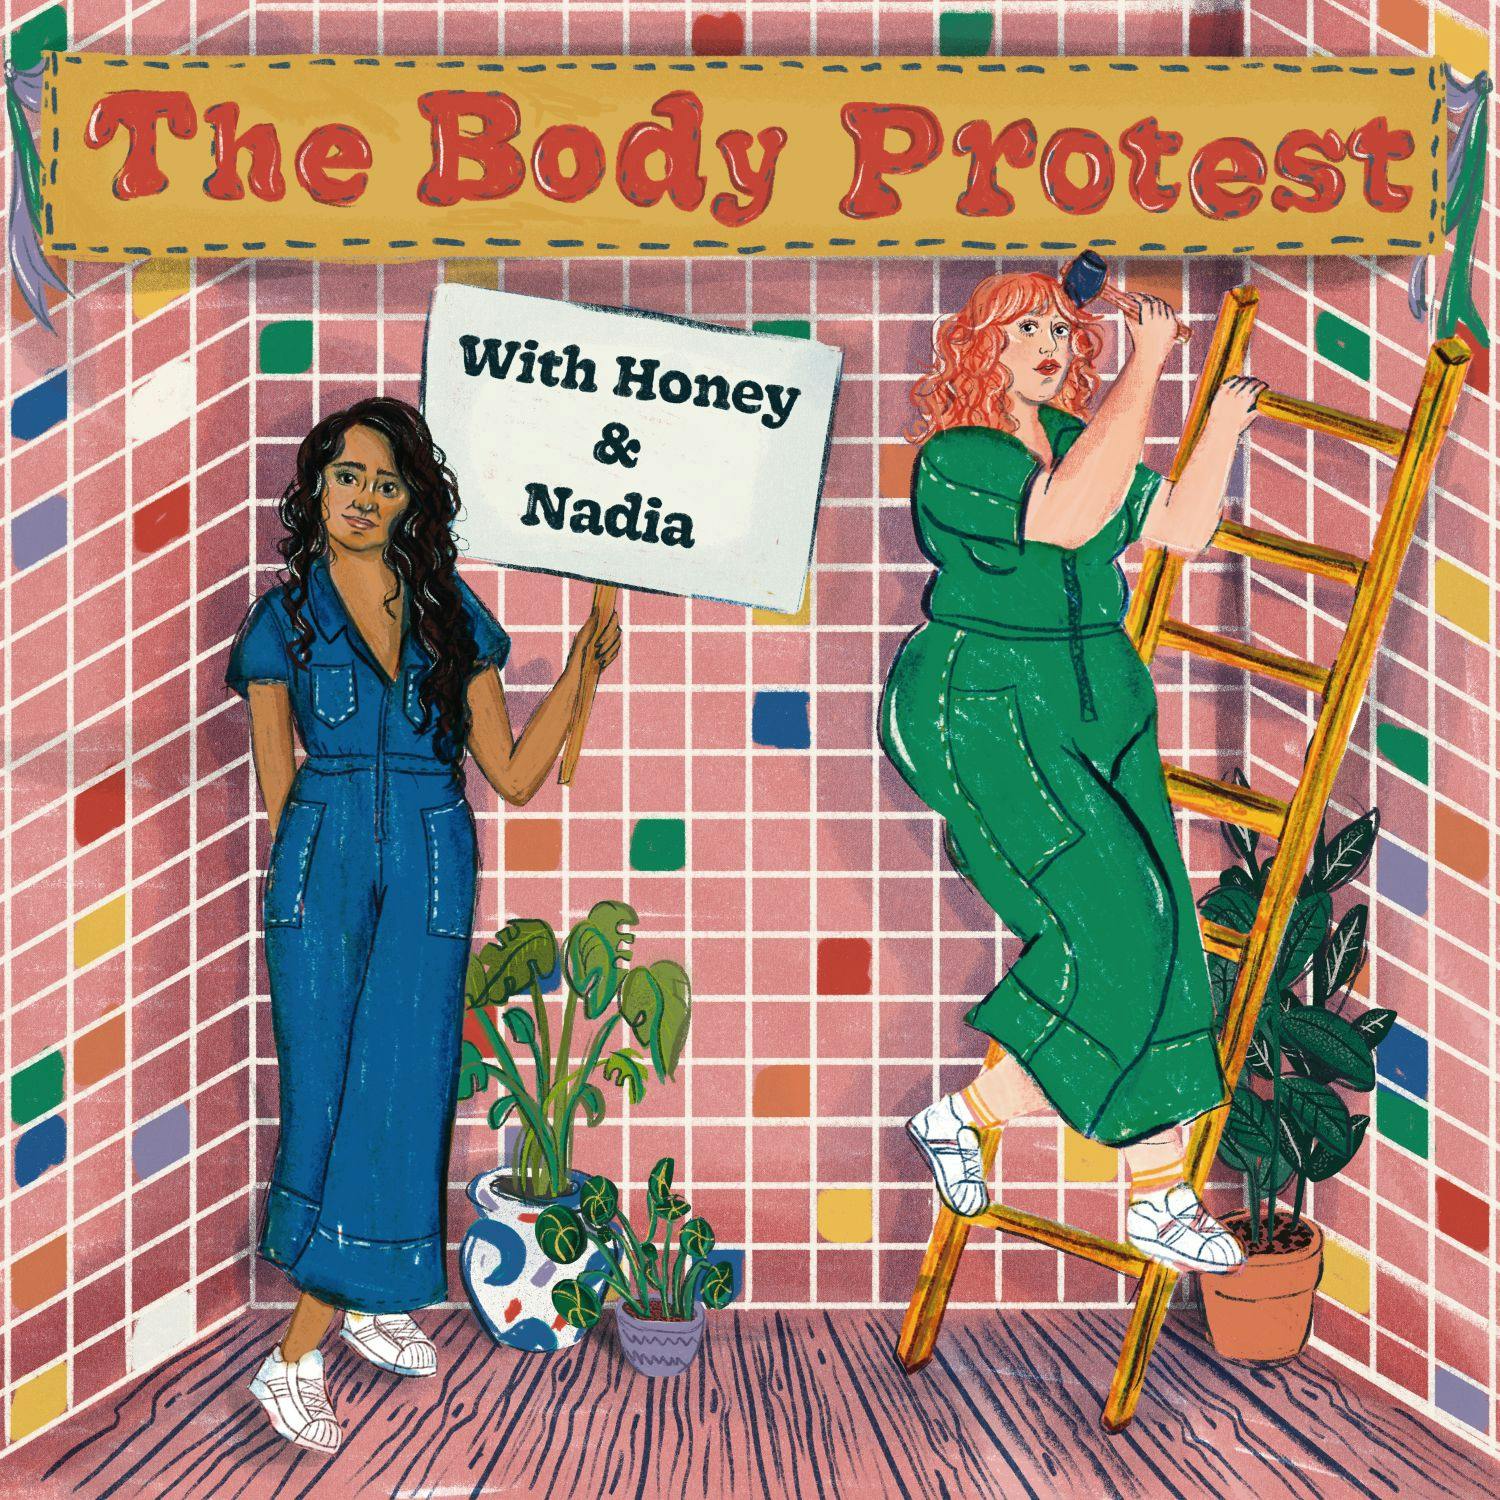 The Body Protest